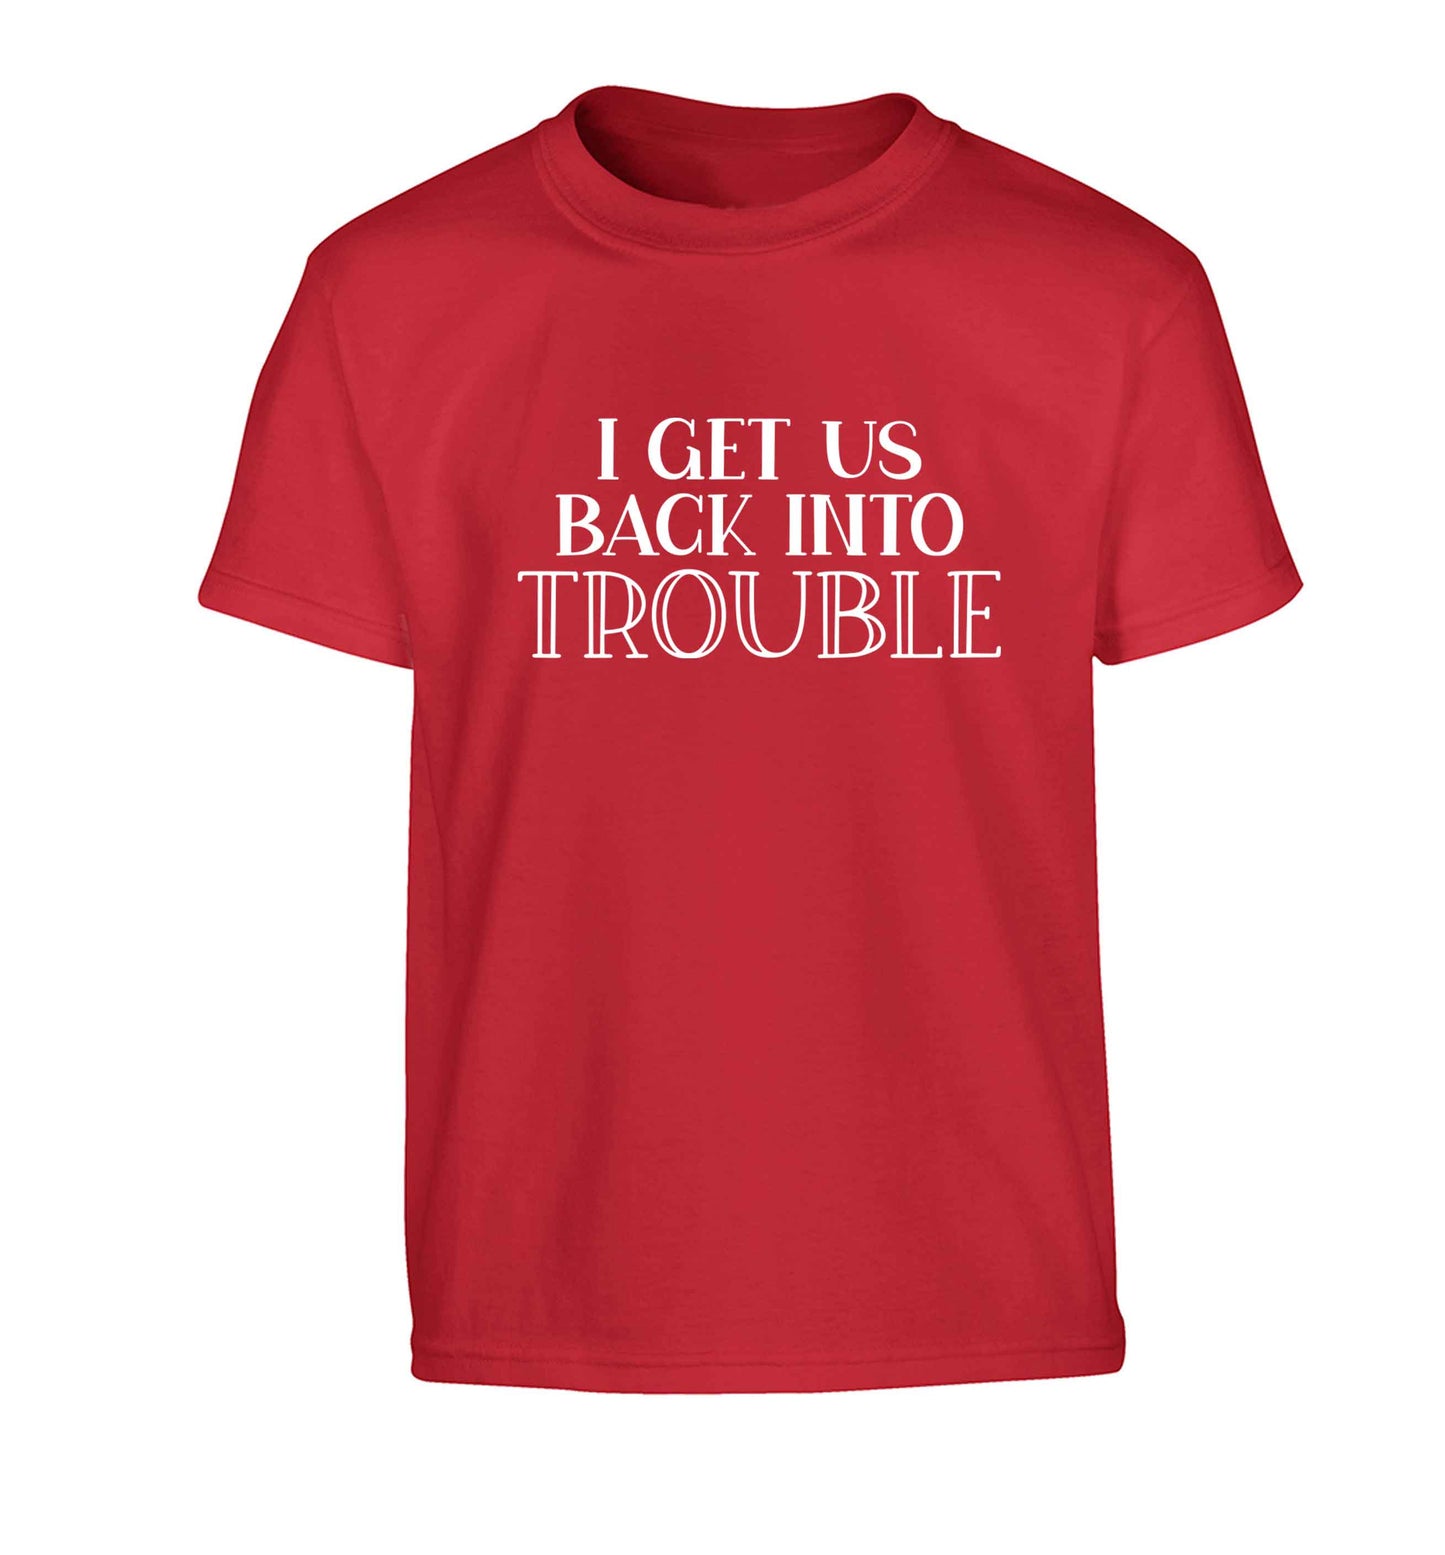 I get us back into trouble Children's red Tshirt 12-13 Years